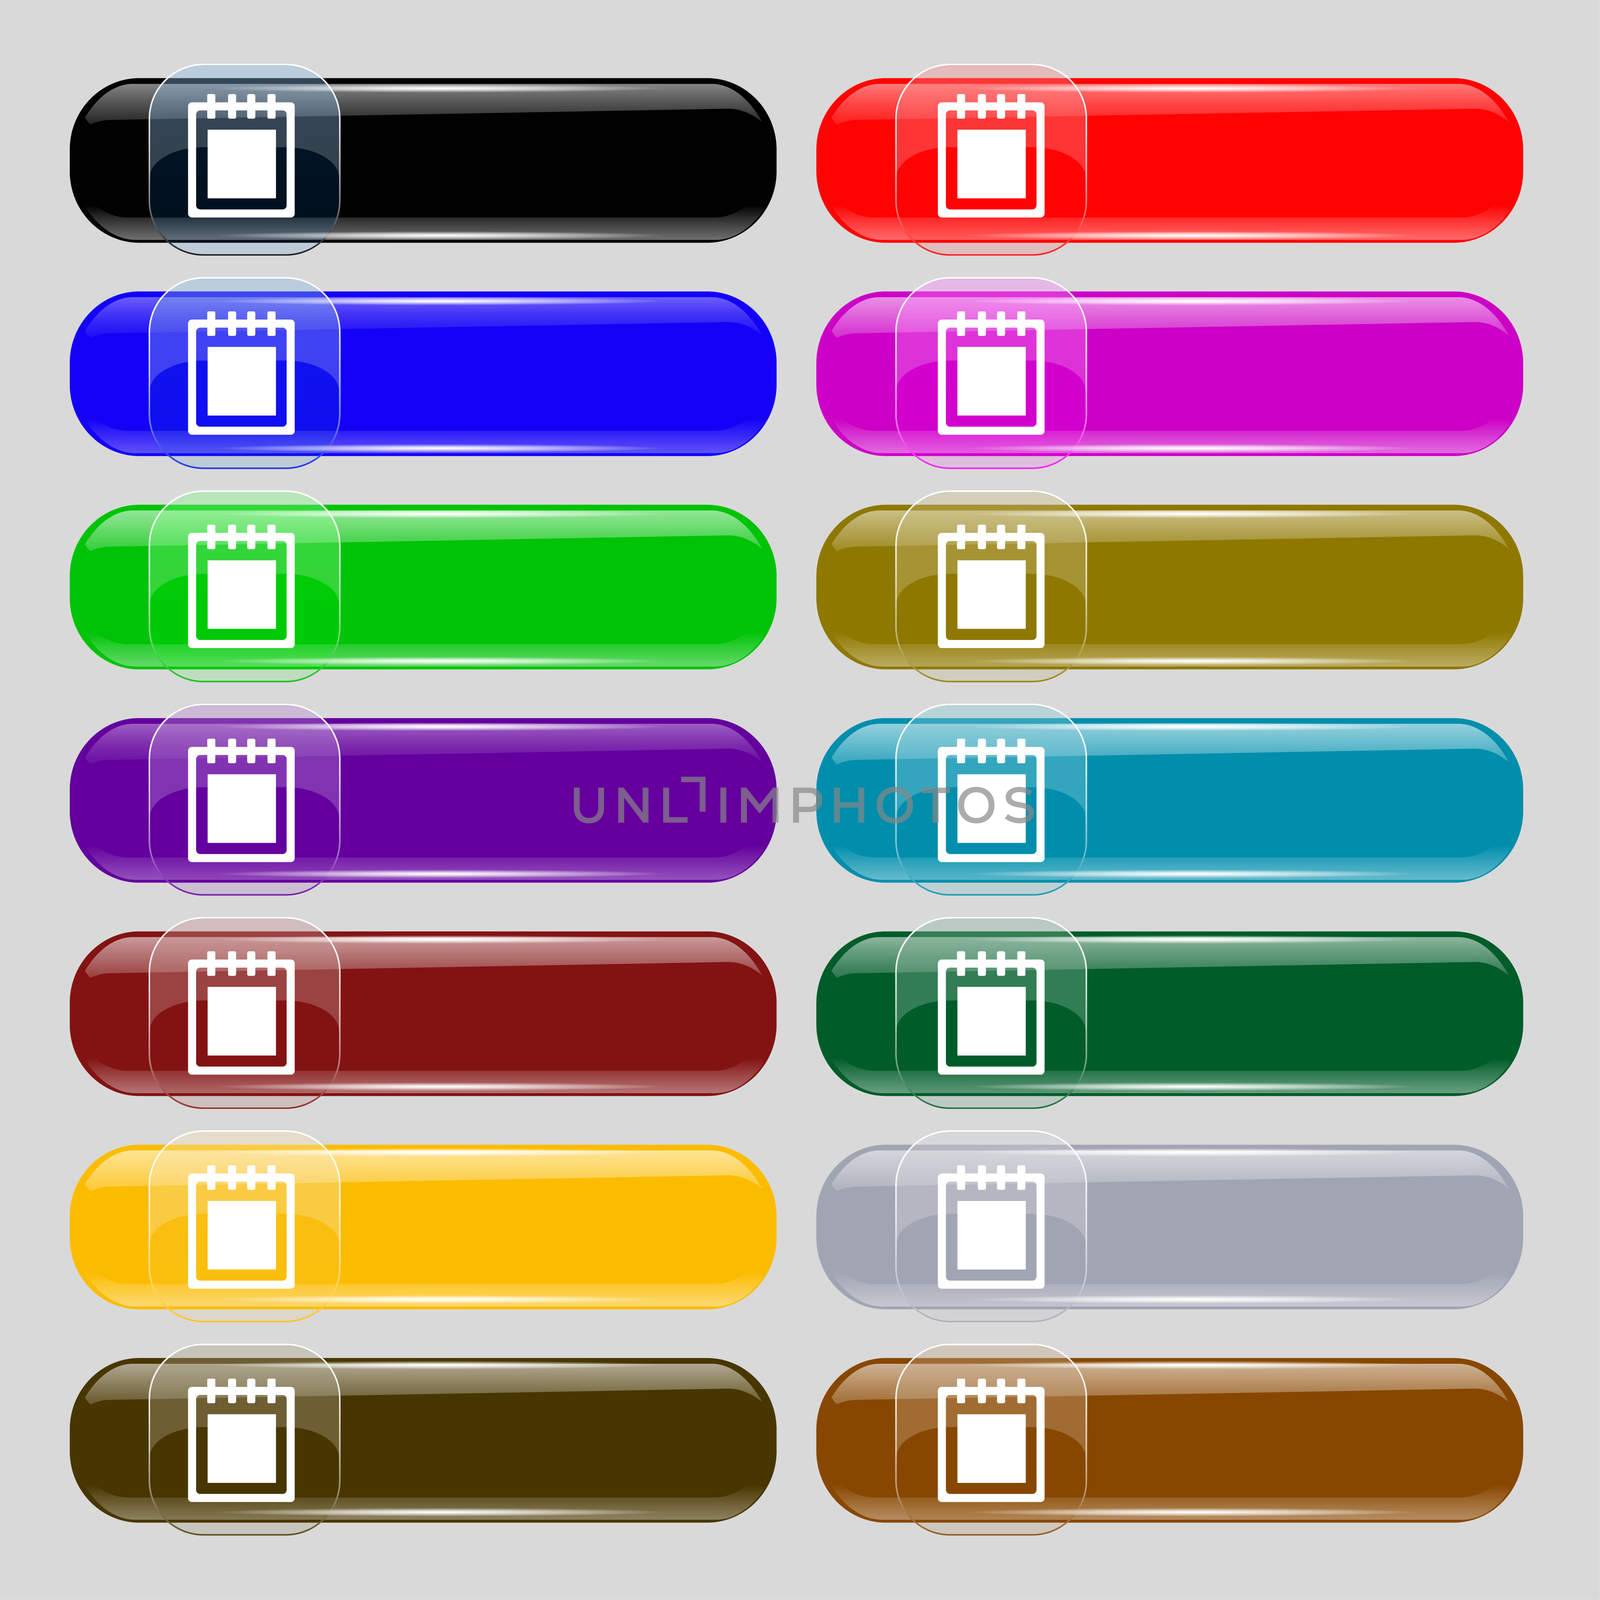 Notepad icon sign. Set from fourteen multi-colored glass buttons with place for text. illustration